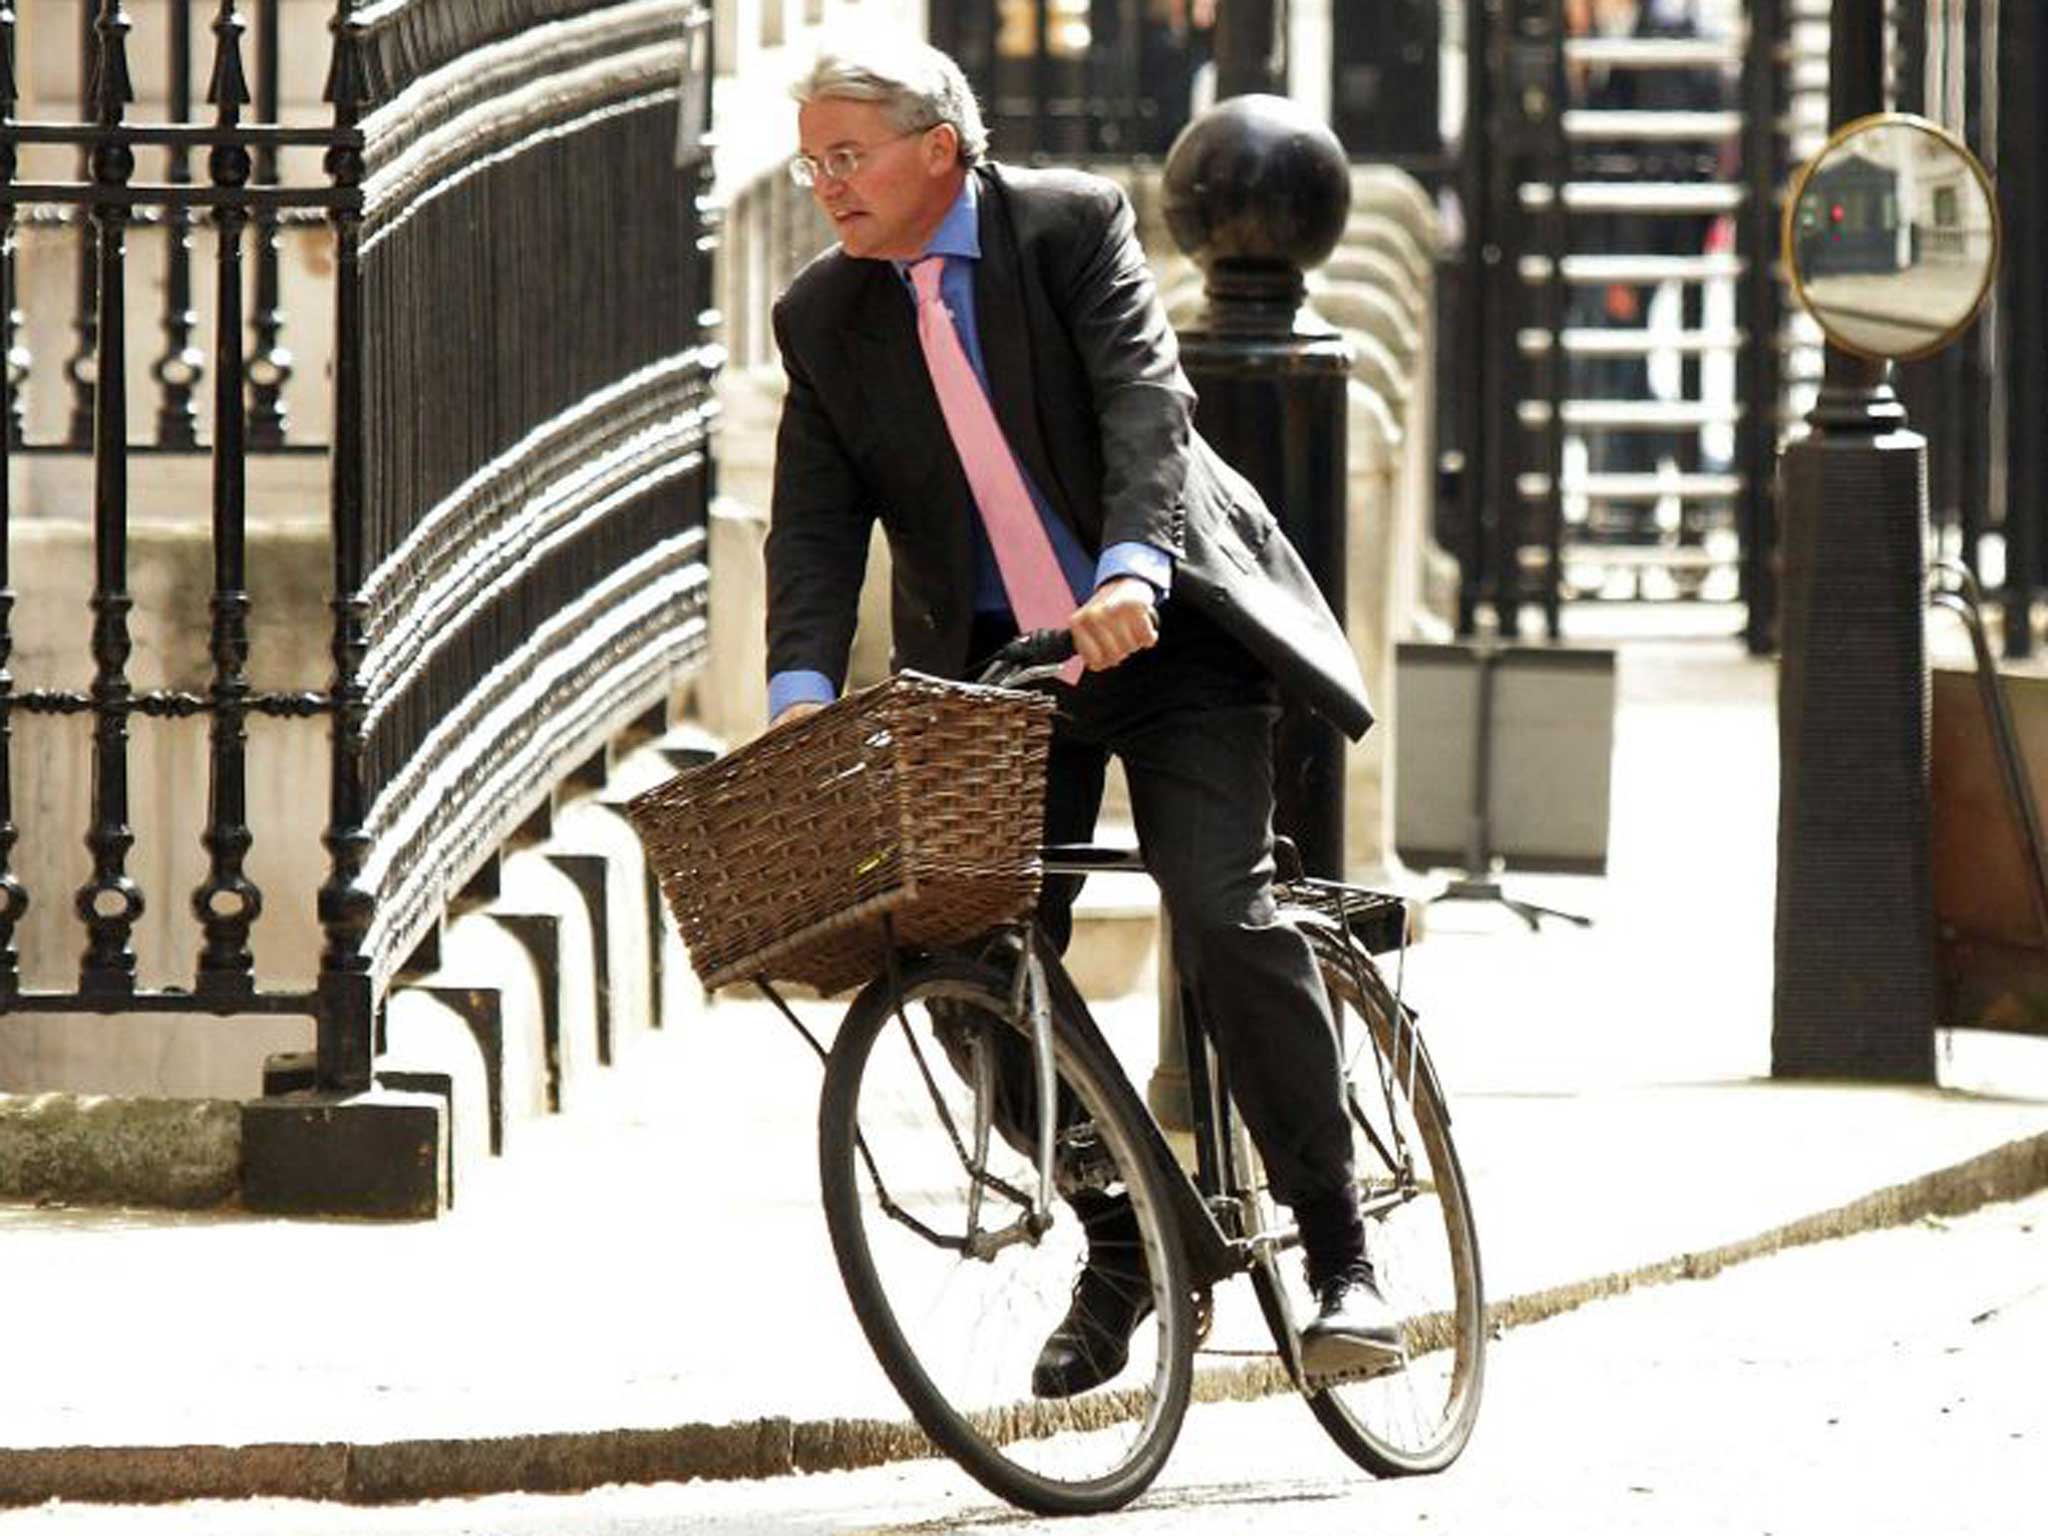 Andrew Mitchell, riding his bike that was part of the original cause of the 'Plebgate' affair